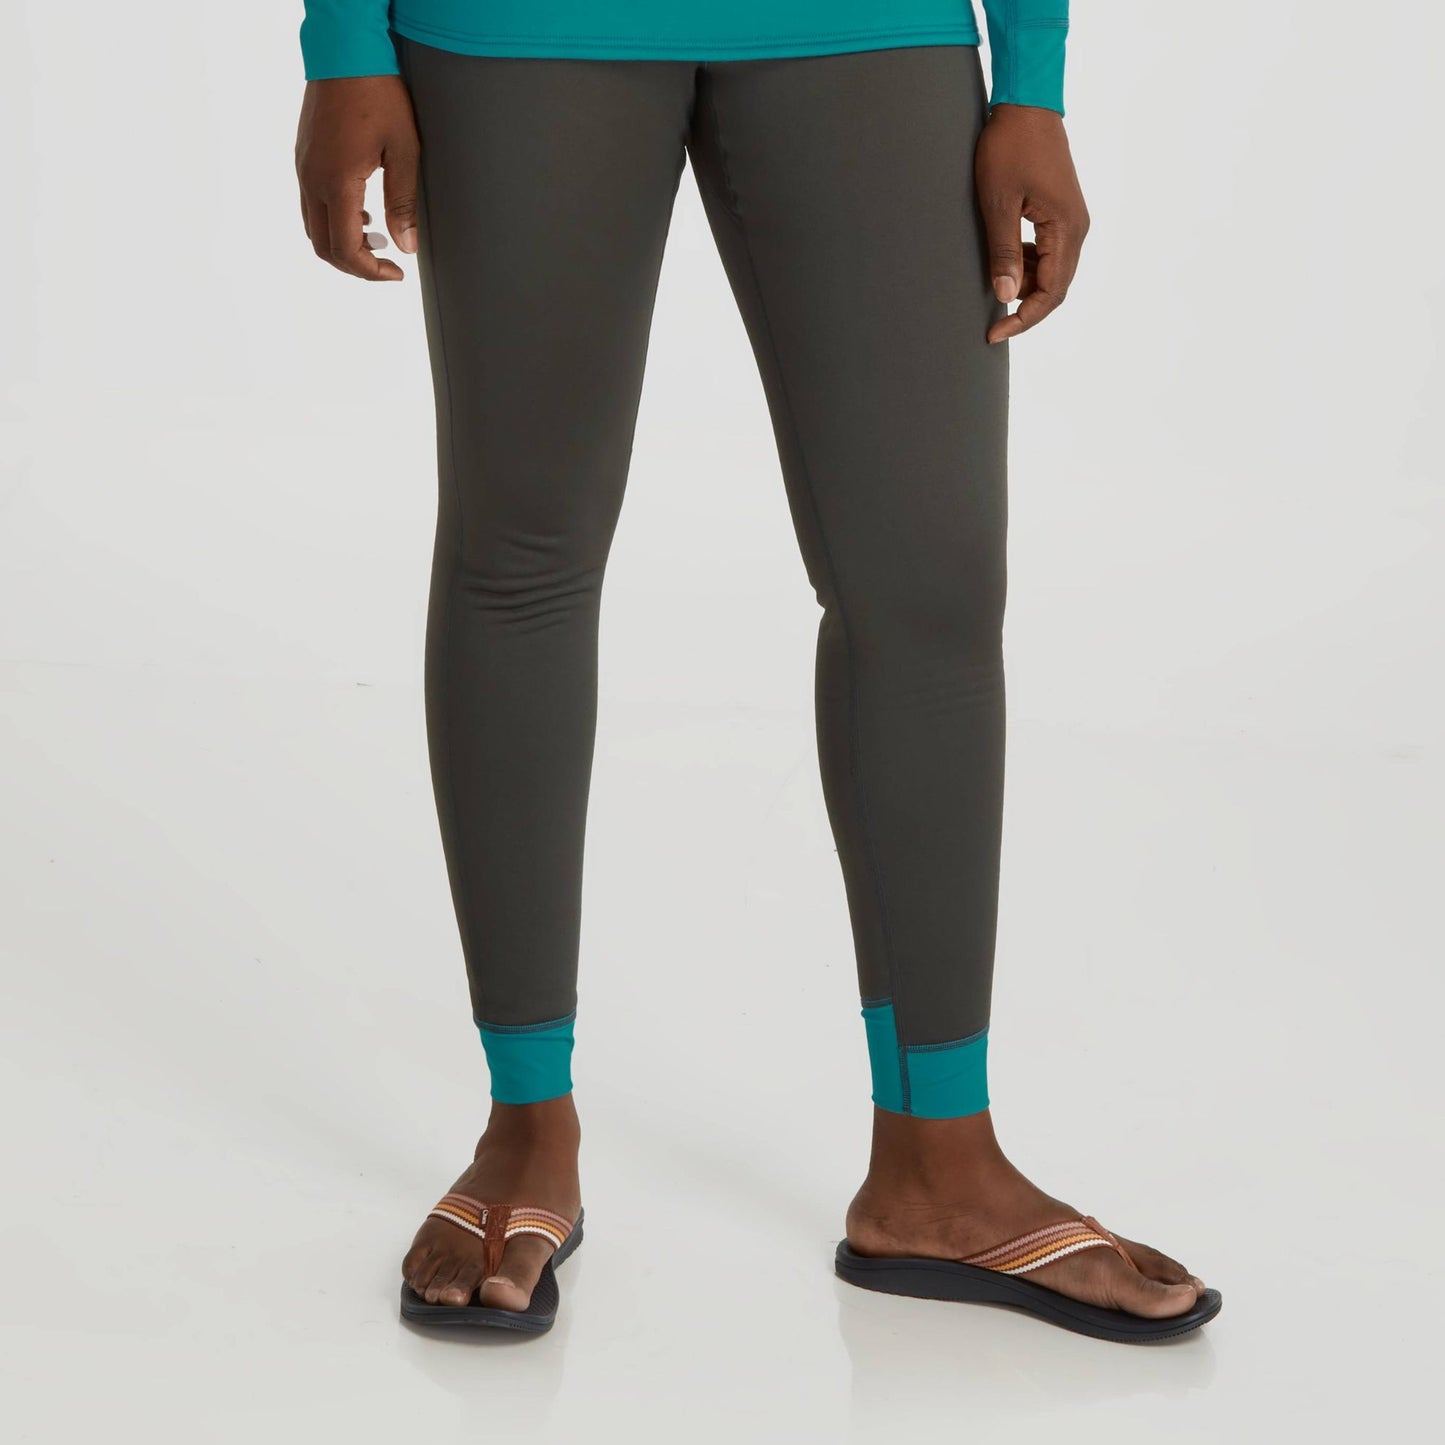 A woman wearing NRS Expedition Weight Pants - Women's and a green top.